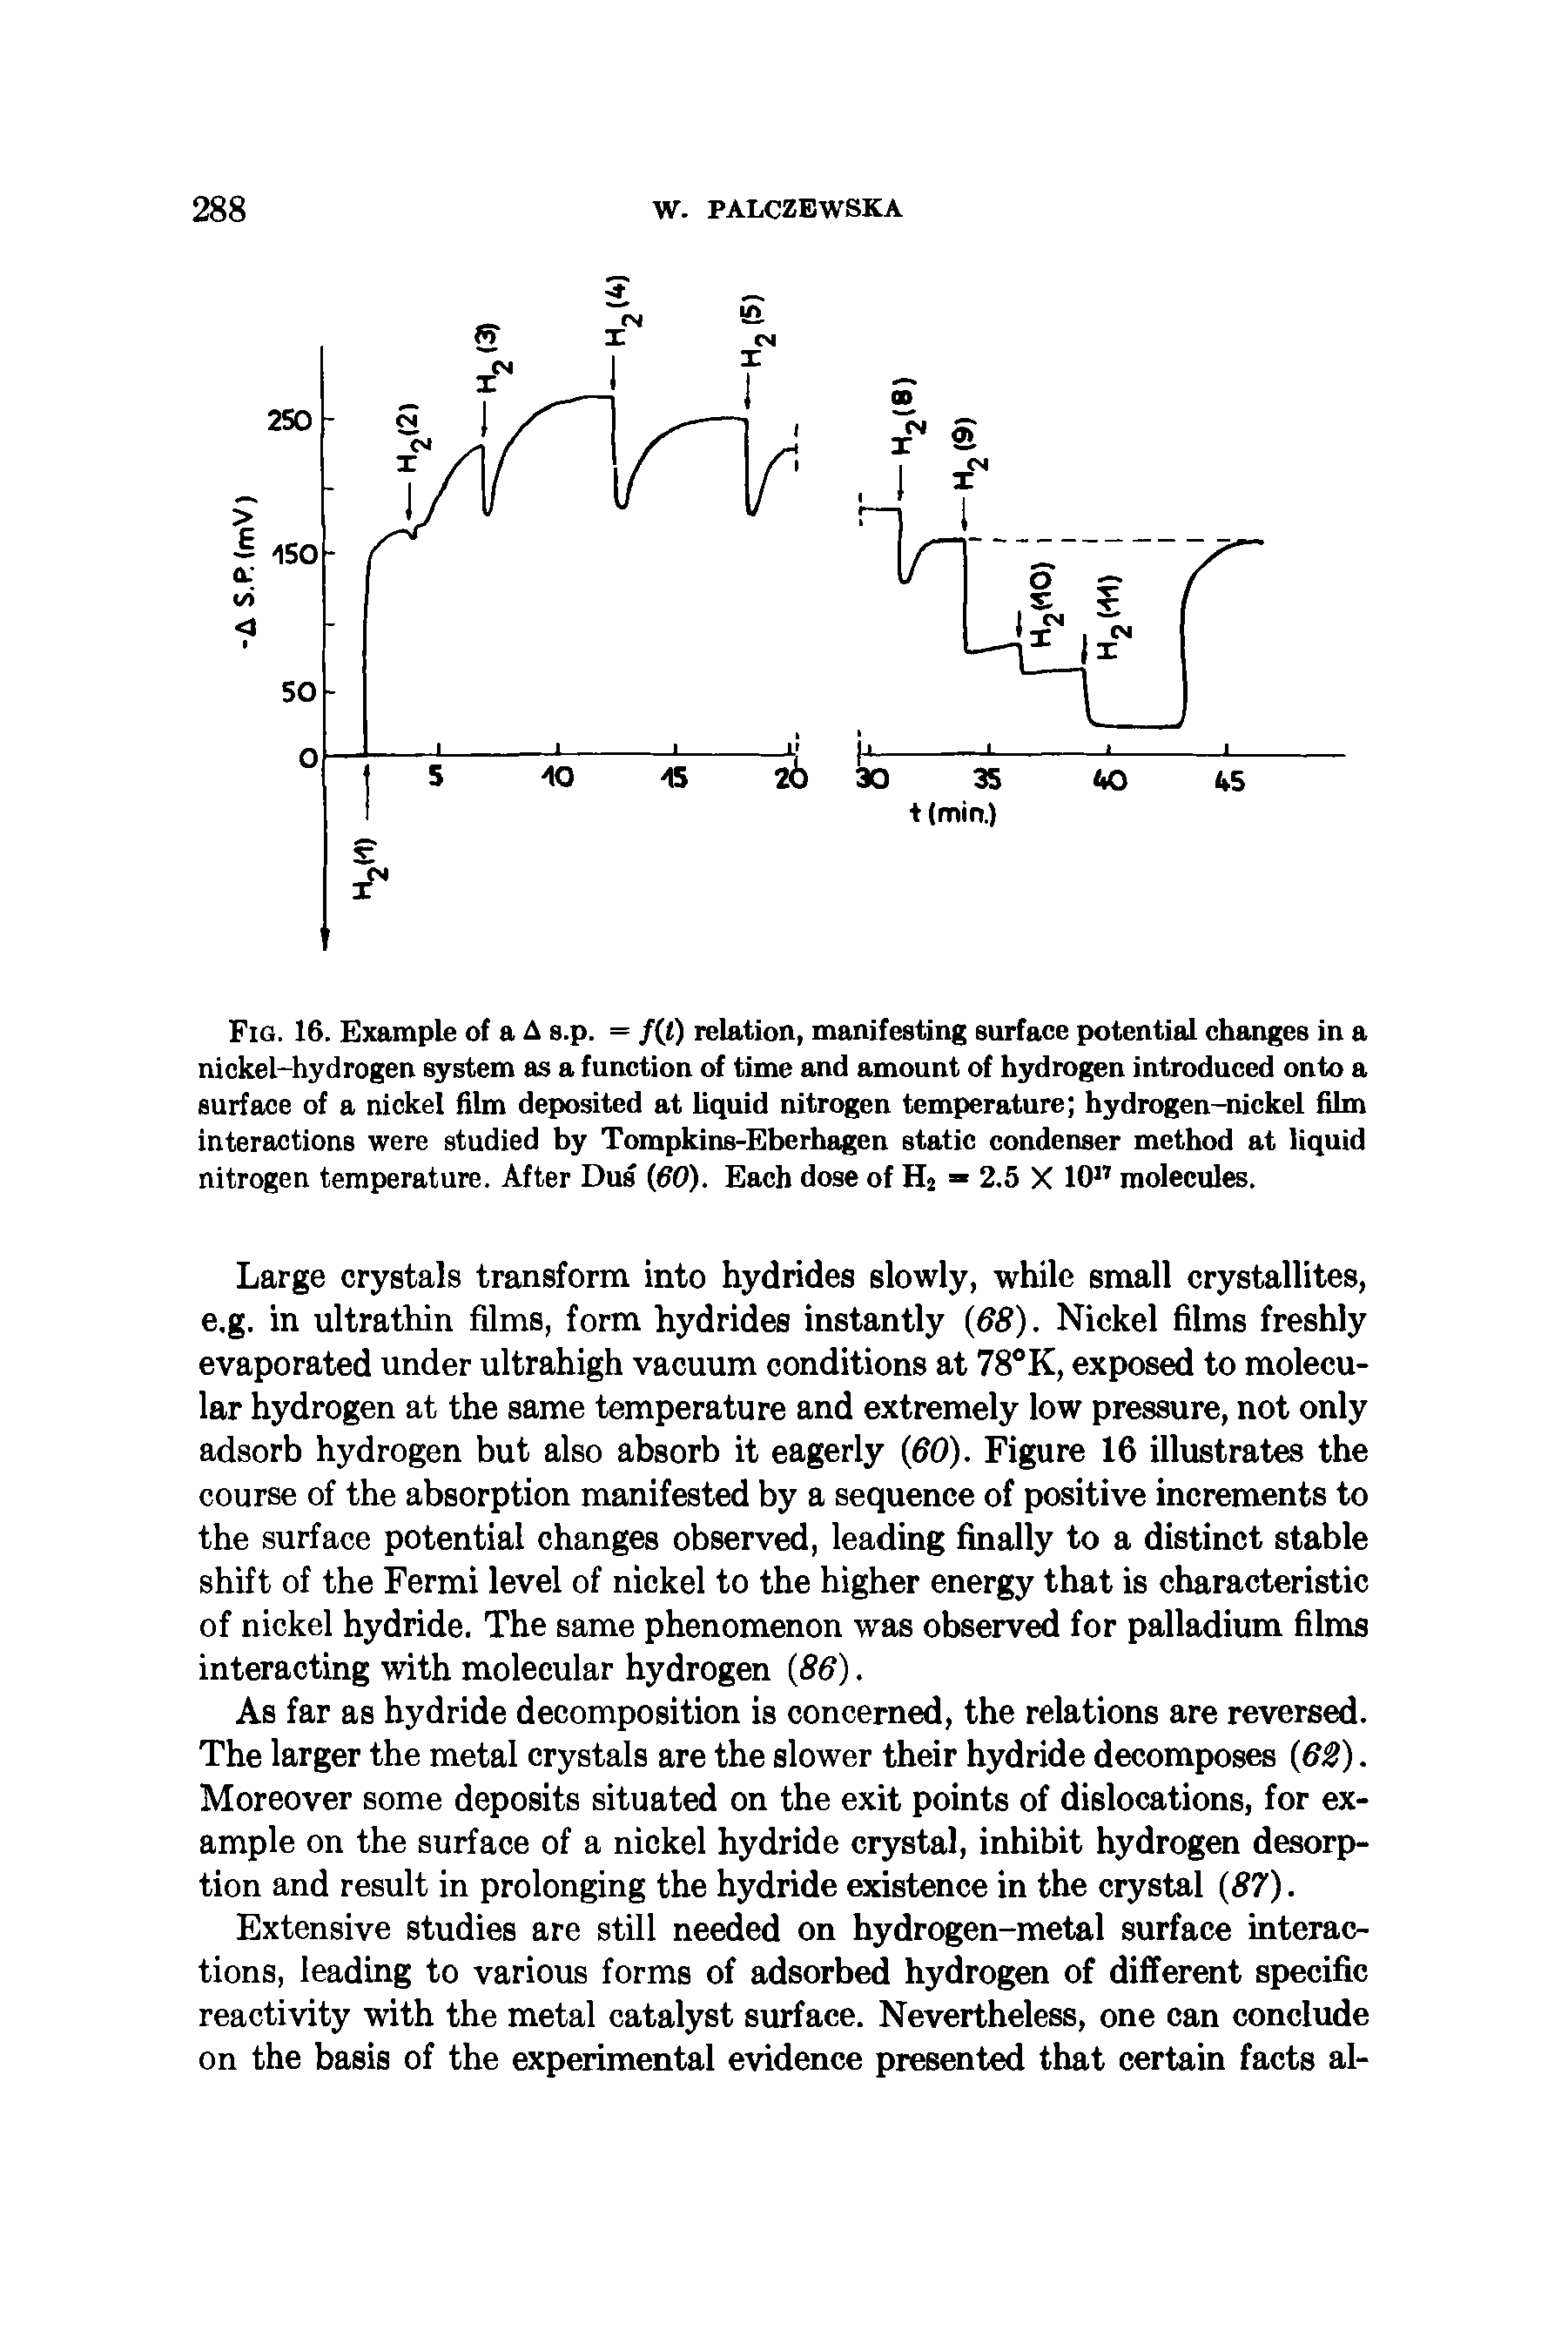 Fig. 16. Example of a A s.p. = f(t) relation, manifesting surface potential changes in a nickel-hydrogen system as a function of time and amount of hydrogen introduced onto a surface of a nickel film deposited at liquid nitrogen temperature hydrogen-nickel film interactions were studied by Tompkins-Eberhagen static condenser method at liquid nitrogen temperature. After Dus (60). Each dose of H2 — 2.5 X 10 molecules.